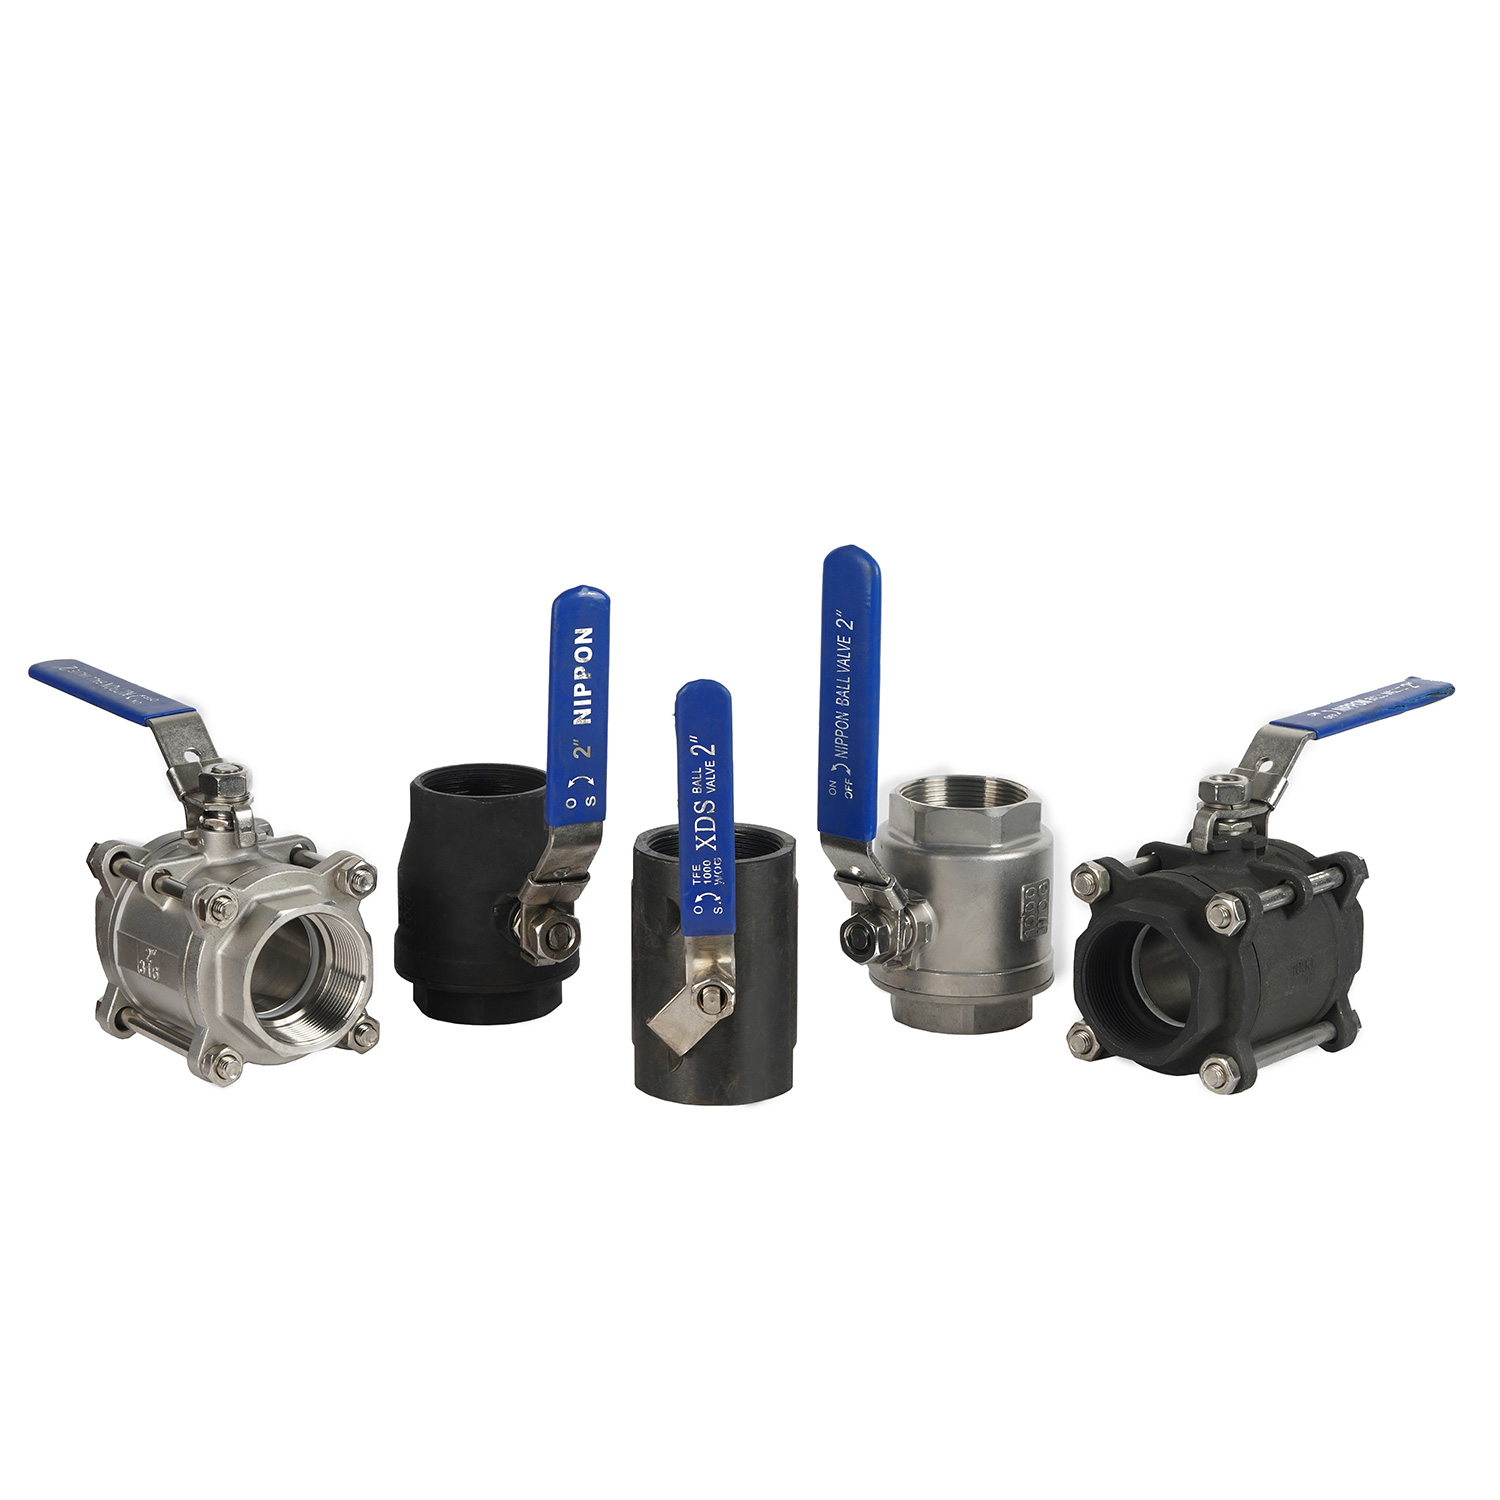 Threaded Ball Valves With (NIPPON) Brand